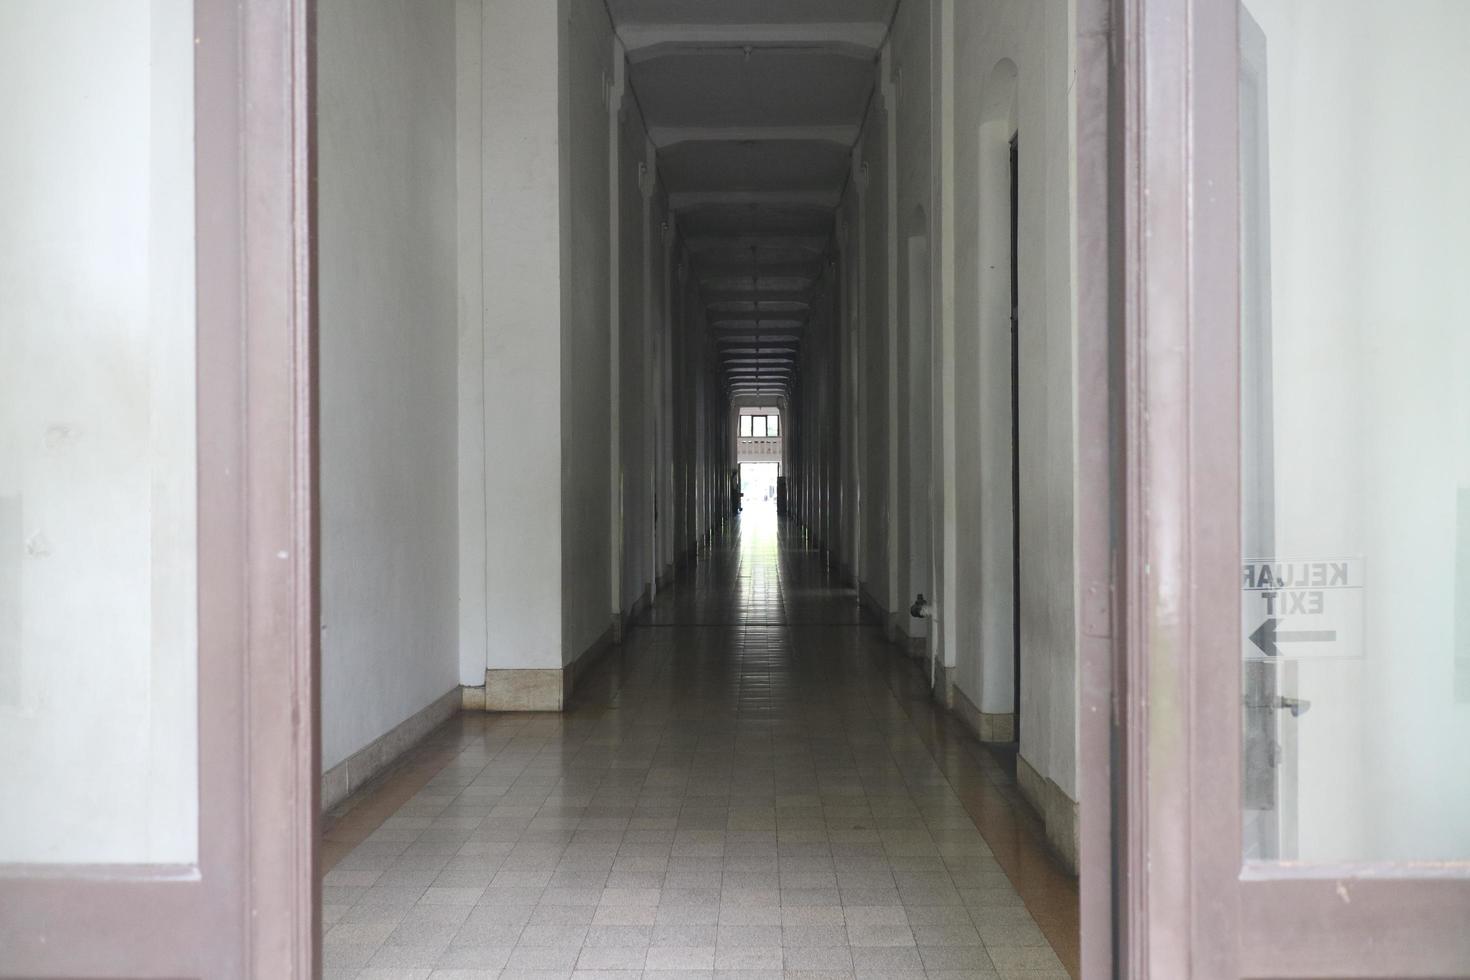 Editorial image of the long hallway in historic building lawang sewu in semarang city central java Indonesia photo